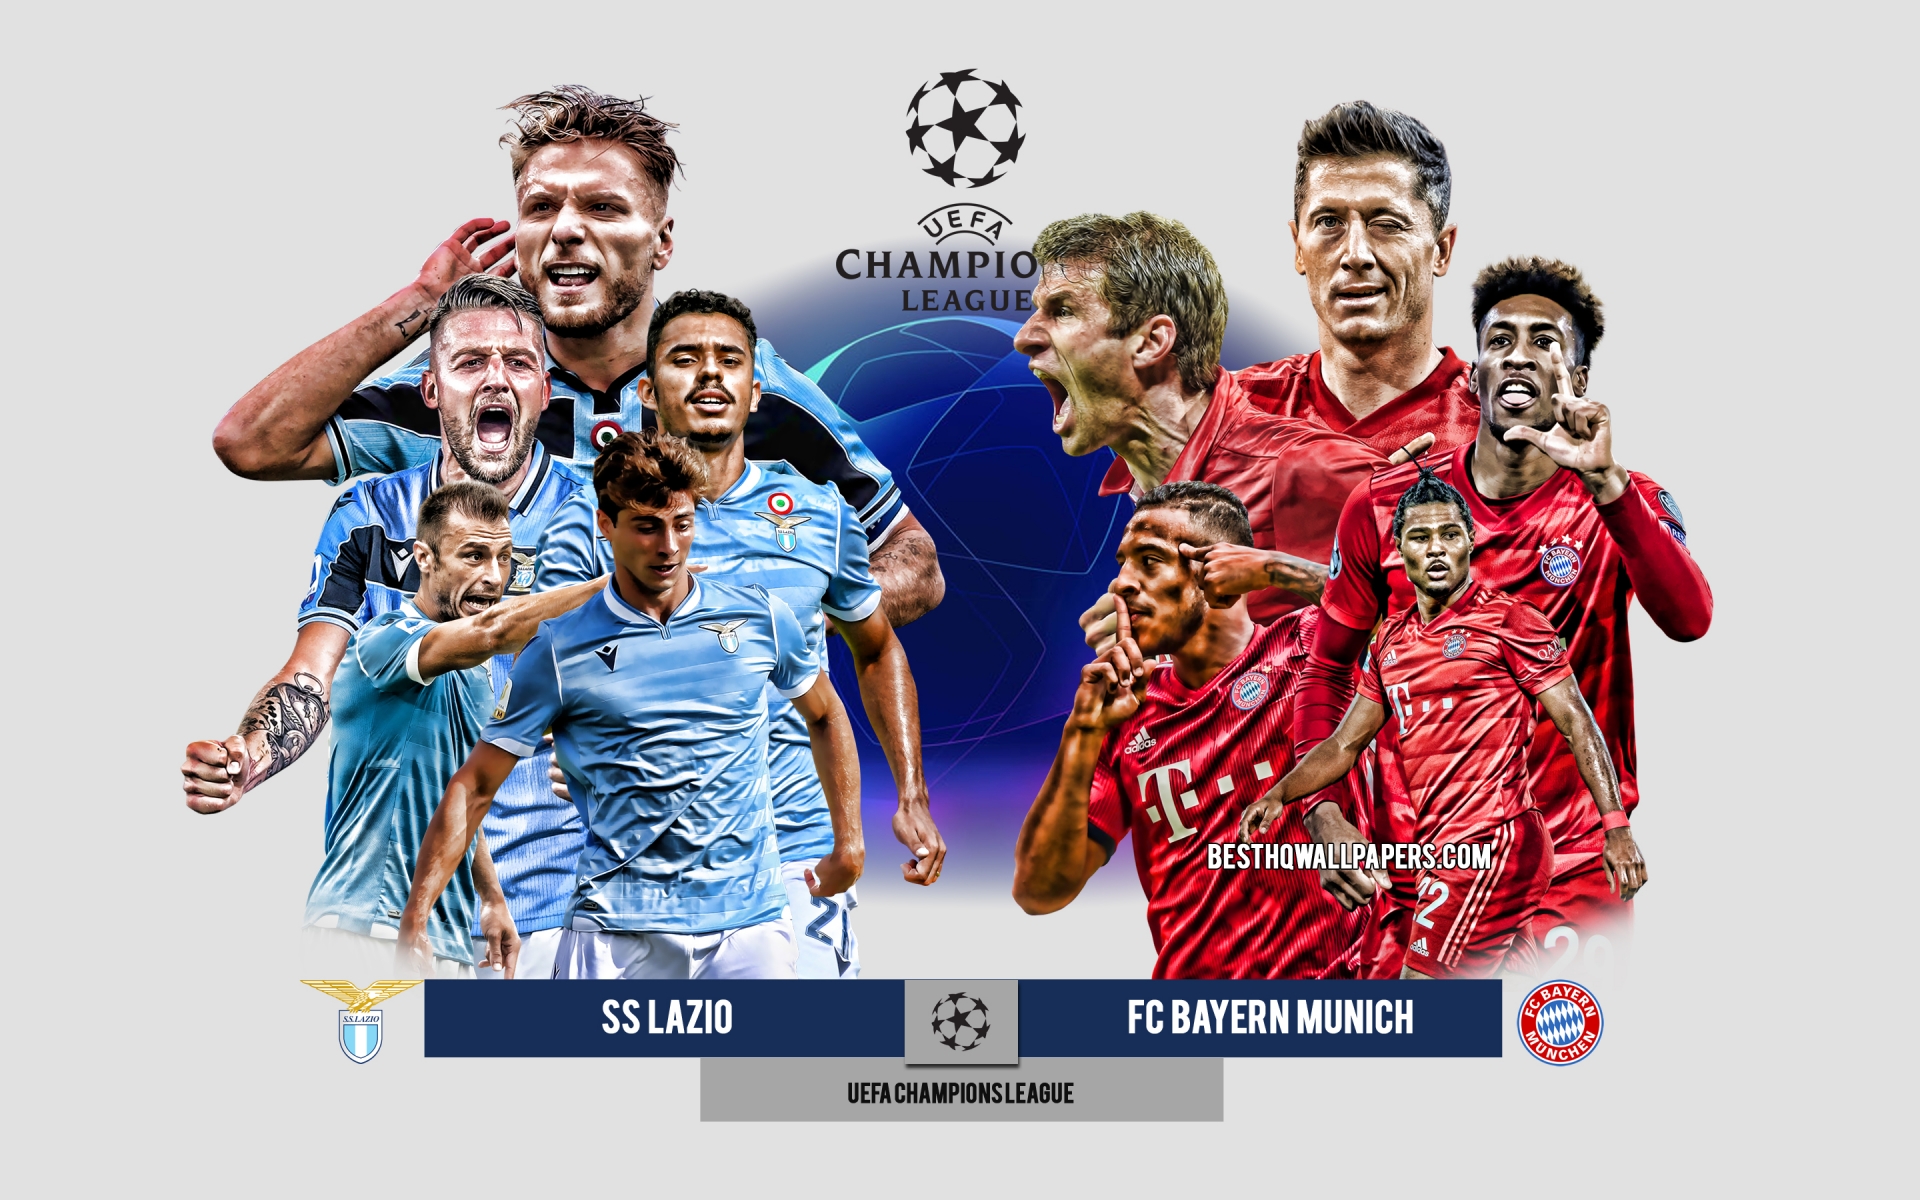 Lazio vs. Bayern Munich - Champions League Preview: Prediction, Team news, Lineups and Where to Watch